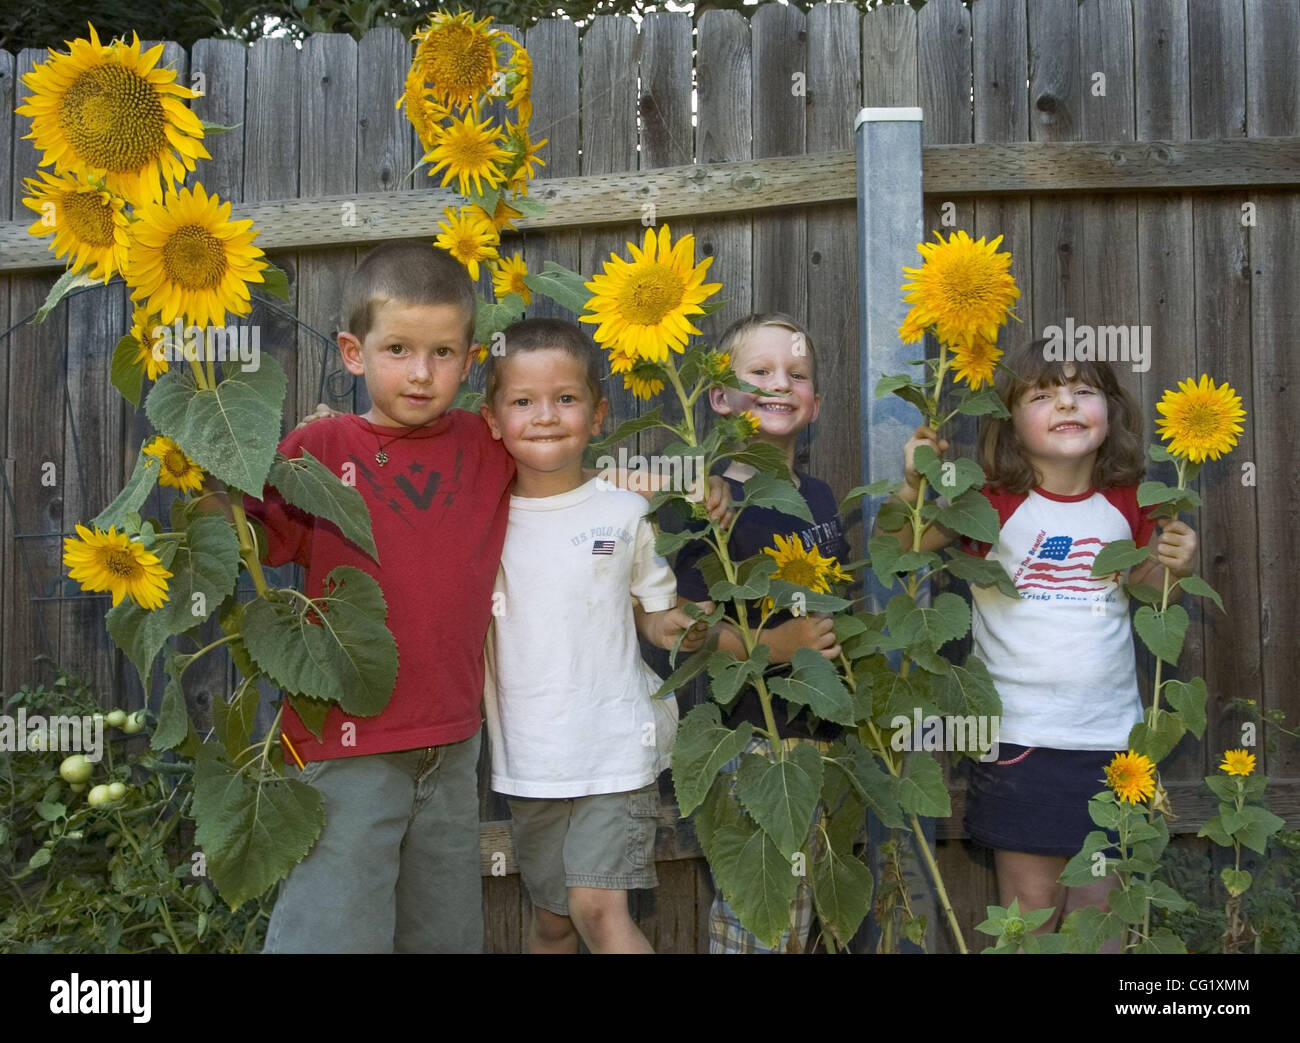 LEDE - L-r: Nicolas Heiskell (cq), 6, Kevin Heiskell (cq), 4, Andrew Jensen (cq), 4, and Emma Vincent (cq), 4, pose with sunflowers in their garden in the Heiskell's yard in Granite Bay. The Sacramento Bee/  Anne Chadwick Williams/  Aug. 29, 2007 Stock Photo